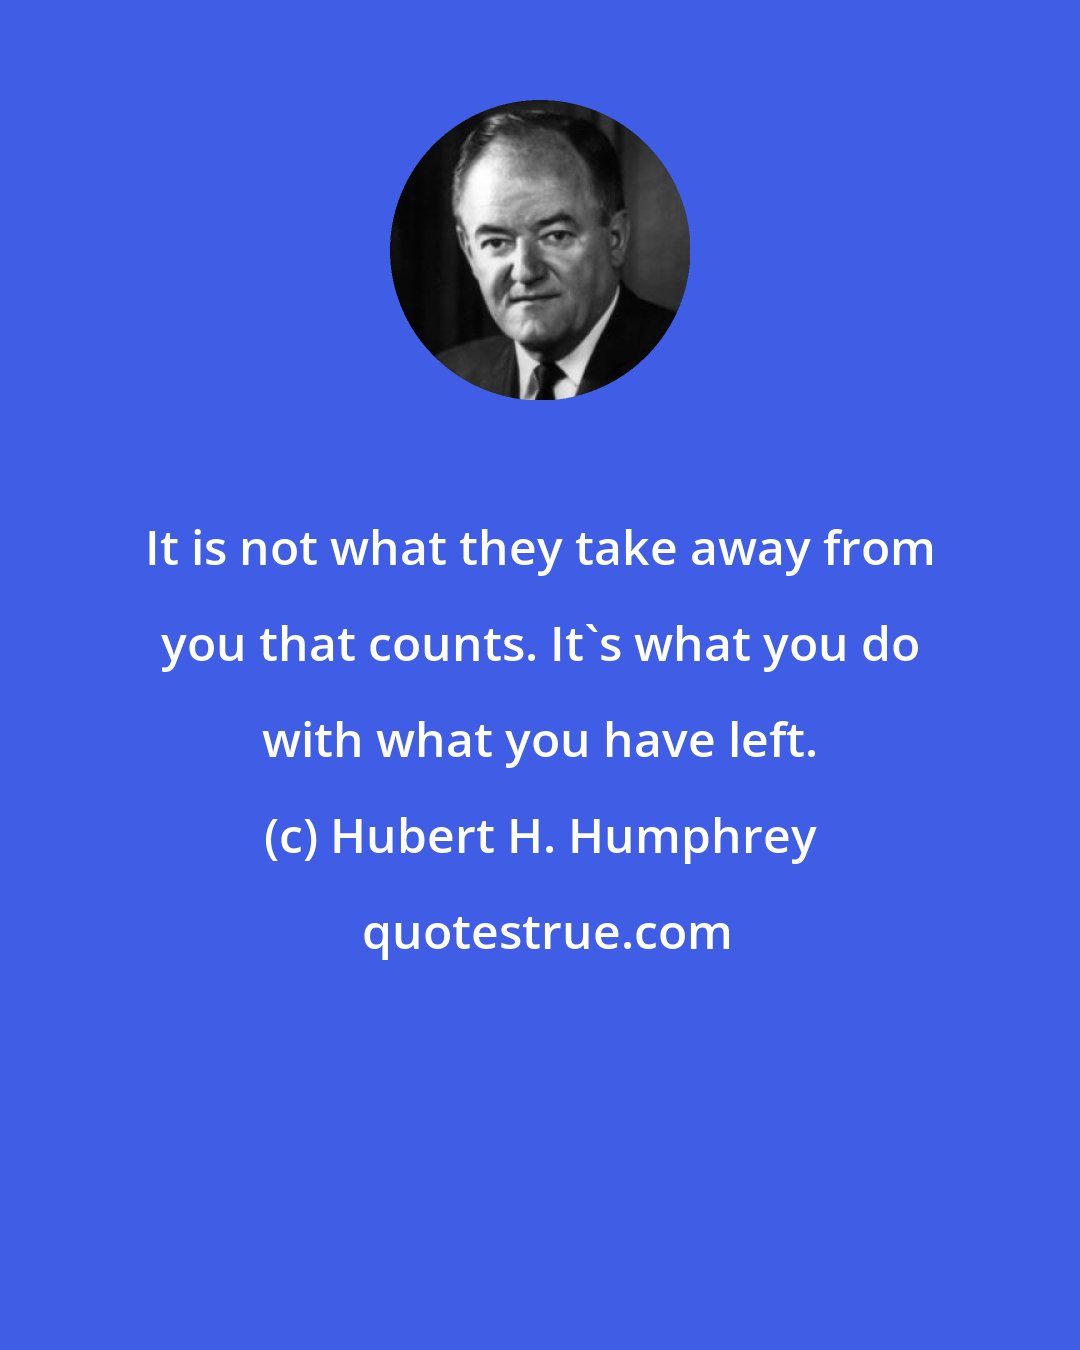 Hubert H. Humphrey: It is not what they take away from you that counts. It's what you do with what you have left.